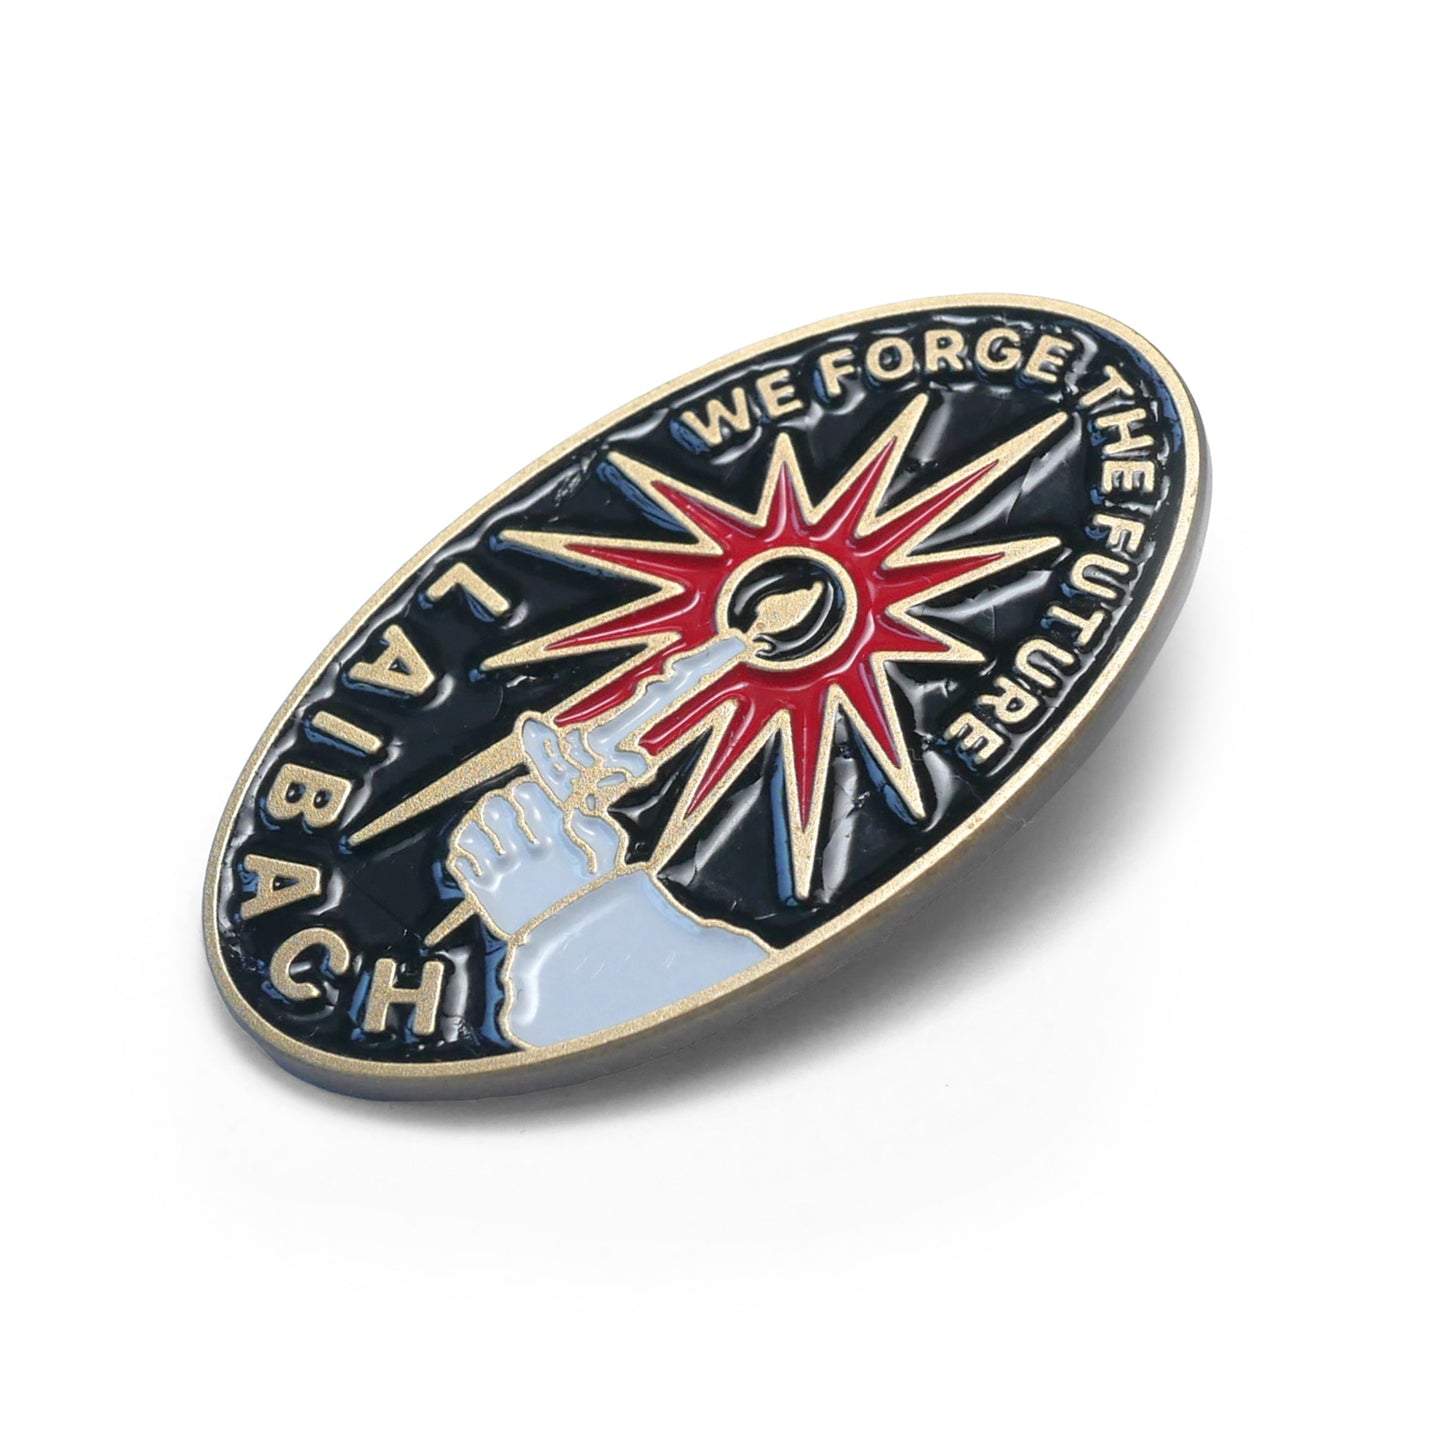 We Forge The Future - Oval Badge